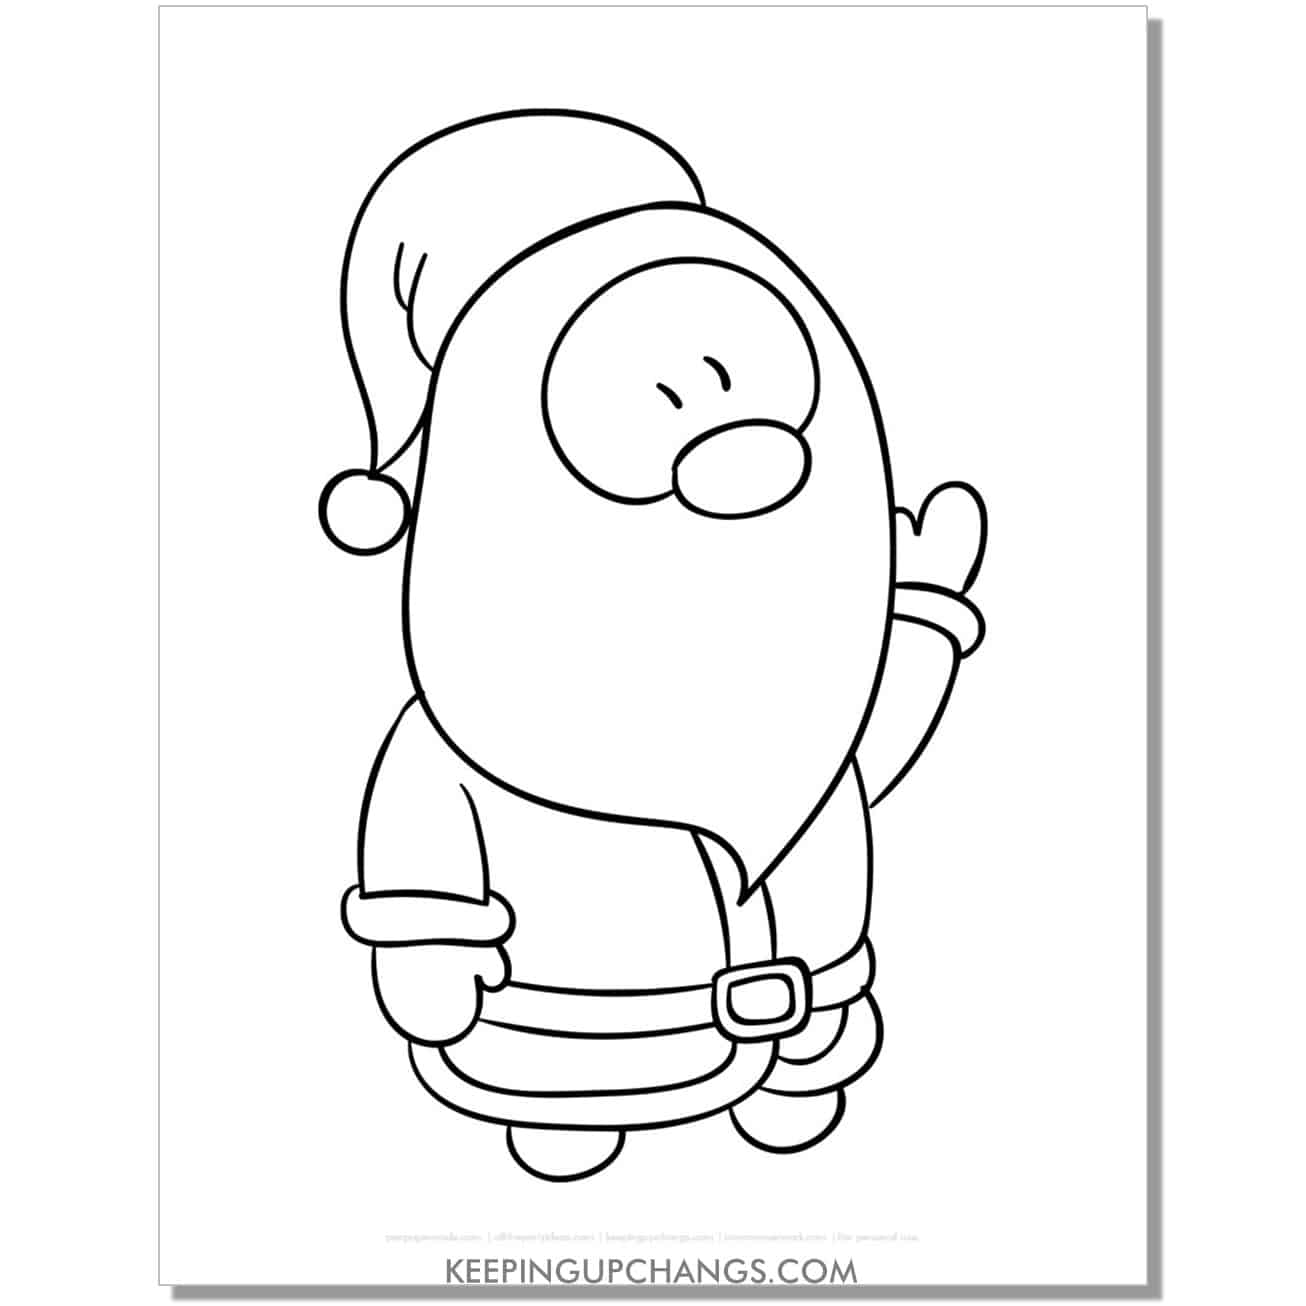 free gnome santa outline, template, cut out, coloring page.